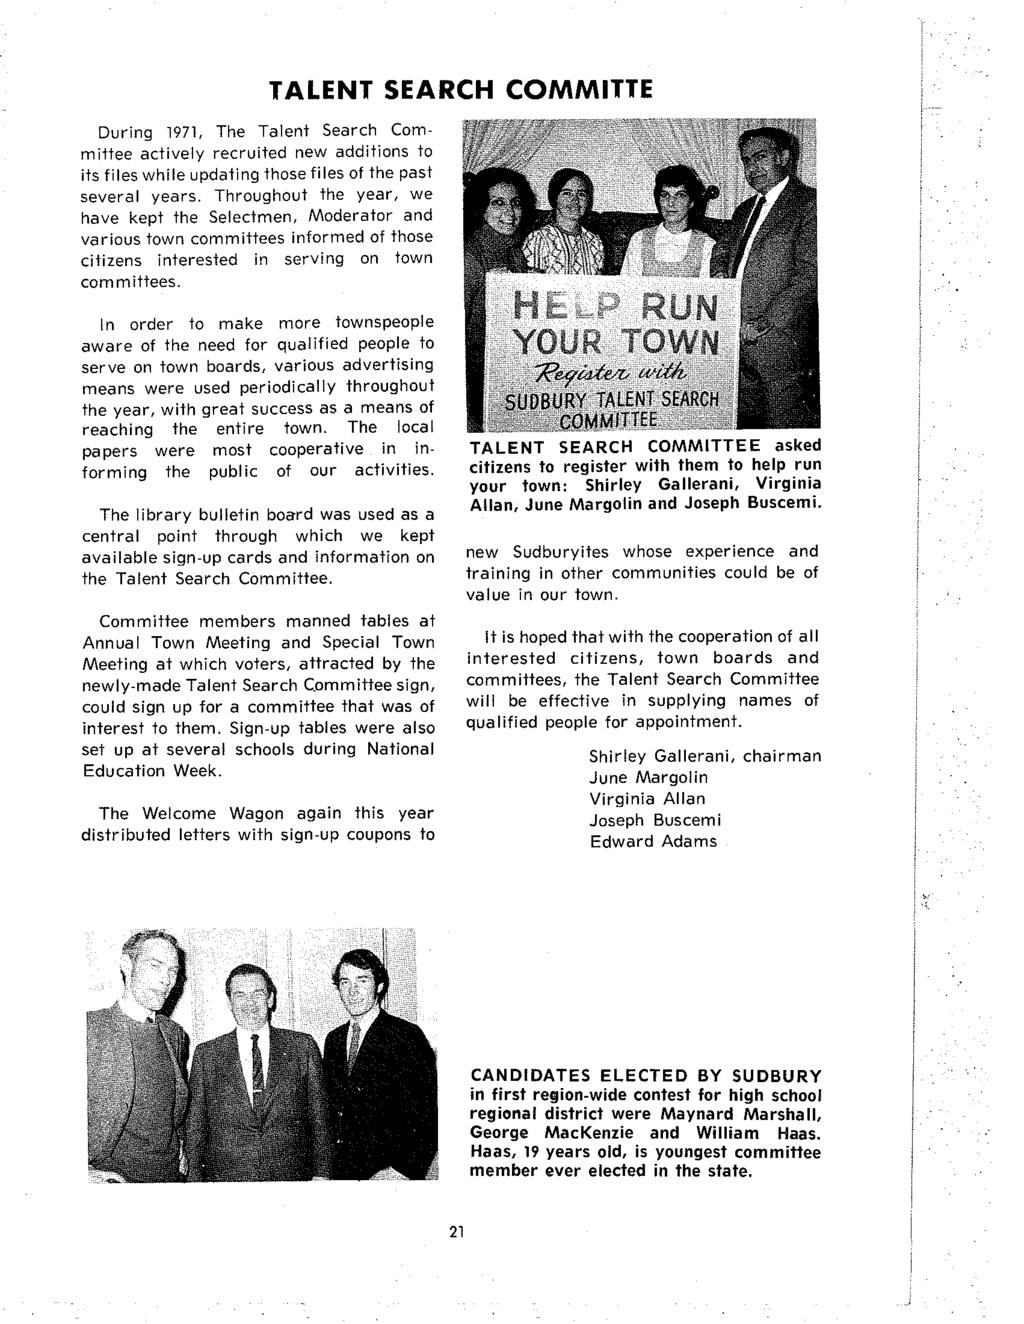 During 1971, The Talent Search Committee actively recruited new additions to its files while updating those files of the past several years.